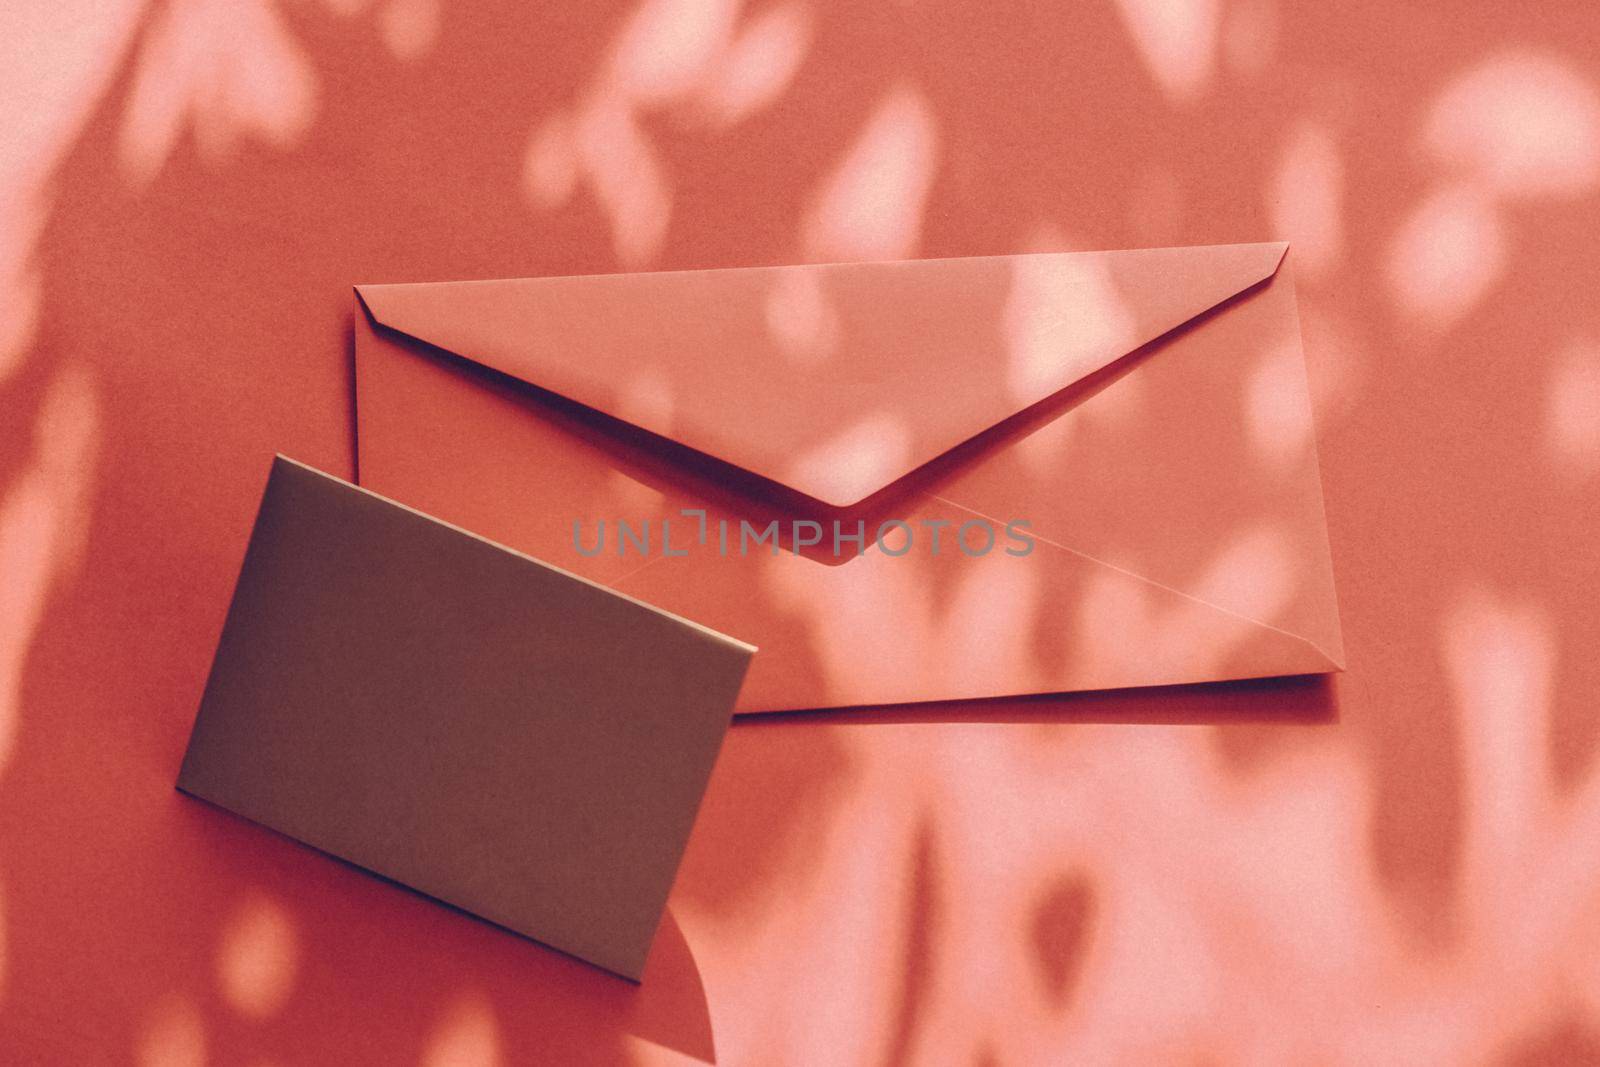 Holiday marketing, business kit and email newsletter concept - Beauty brand identity as flatlay mockup design, business card and letter for online luxury branding on orange shadow background